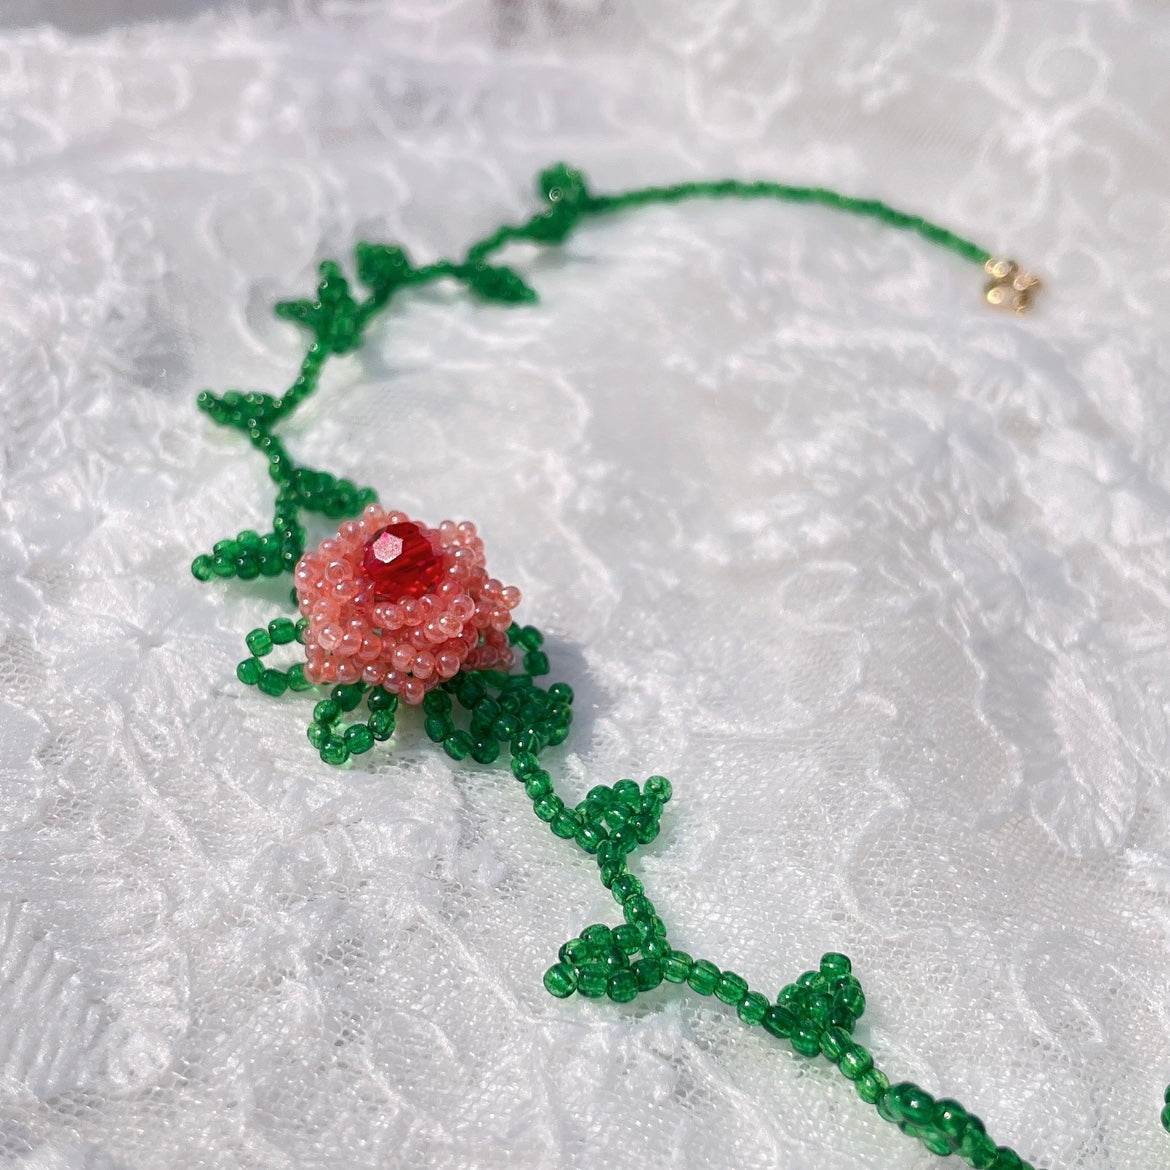 The Little Prince's Rose-Gentle Rose Original Handmade Handmade Beaded Beaded Pearl Necklace Fairy Temperament Necklace